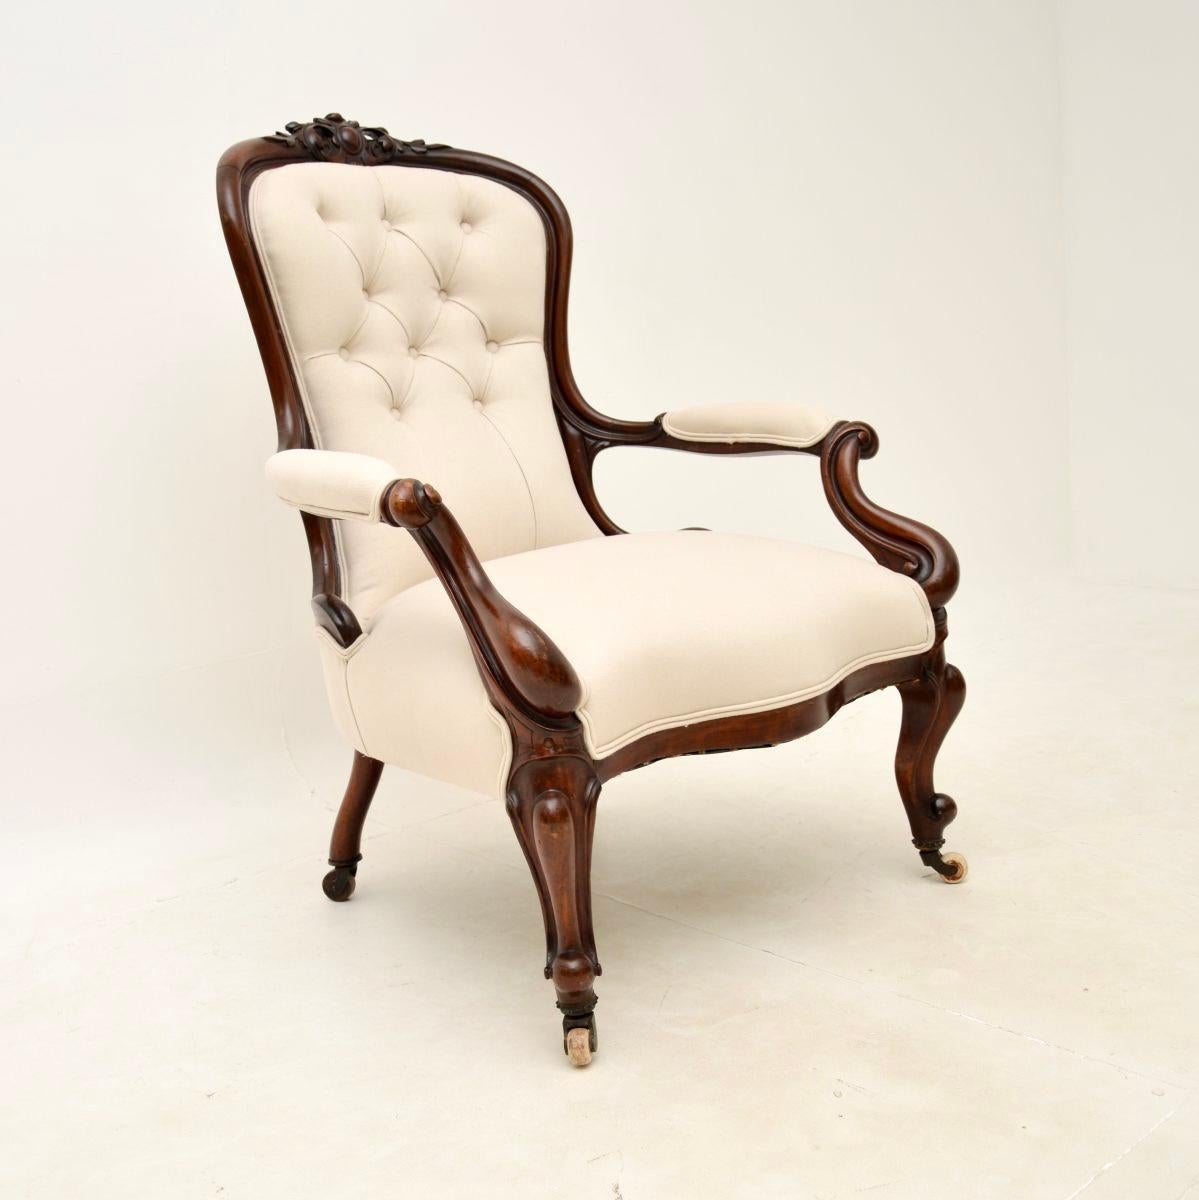 An excellent antique Victorian spoon back armchair. This was made in England and it dates from around the 1860-1880’s period.

The quality is fantastic, it is very well designed and is also extremely comfortable. The frame is very well carved and